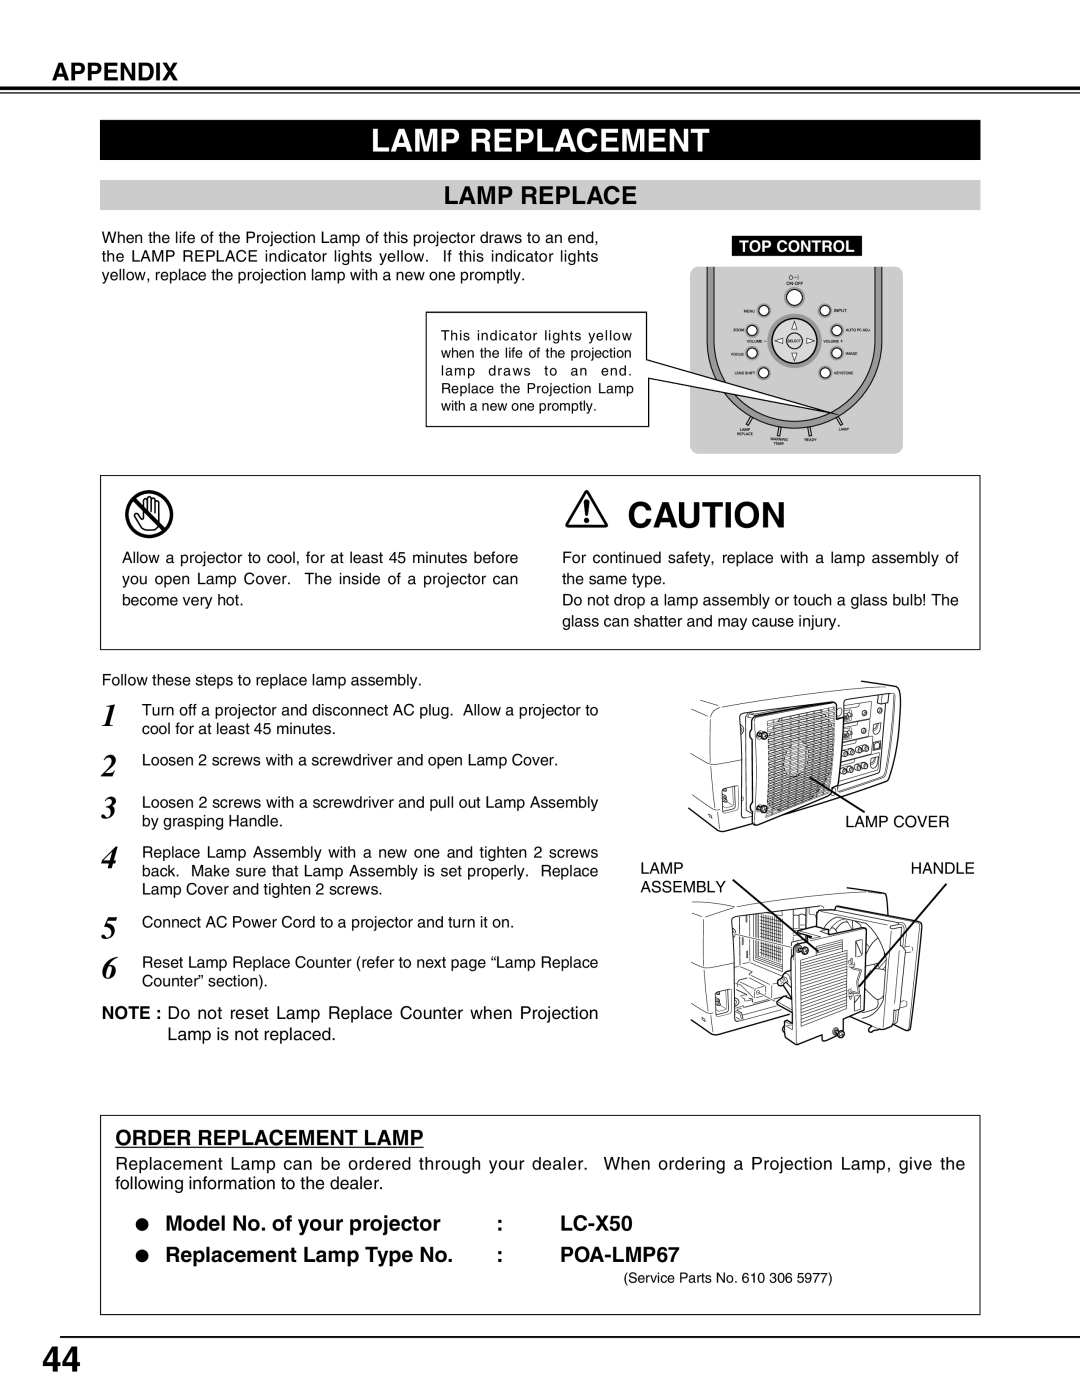 Eiki LC-X50 instruction manual Lamp Replacement, Appendix 